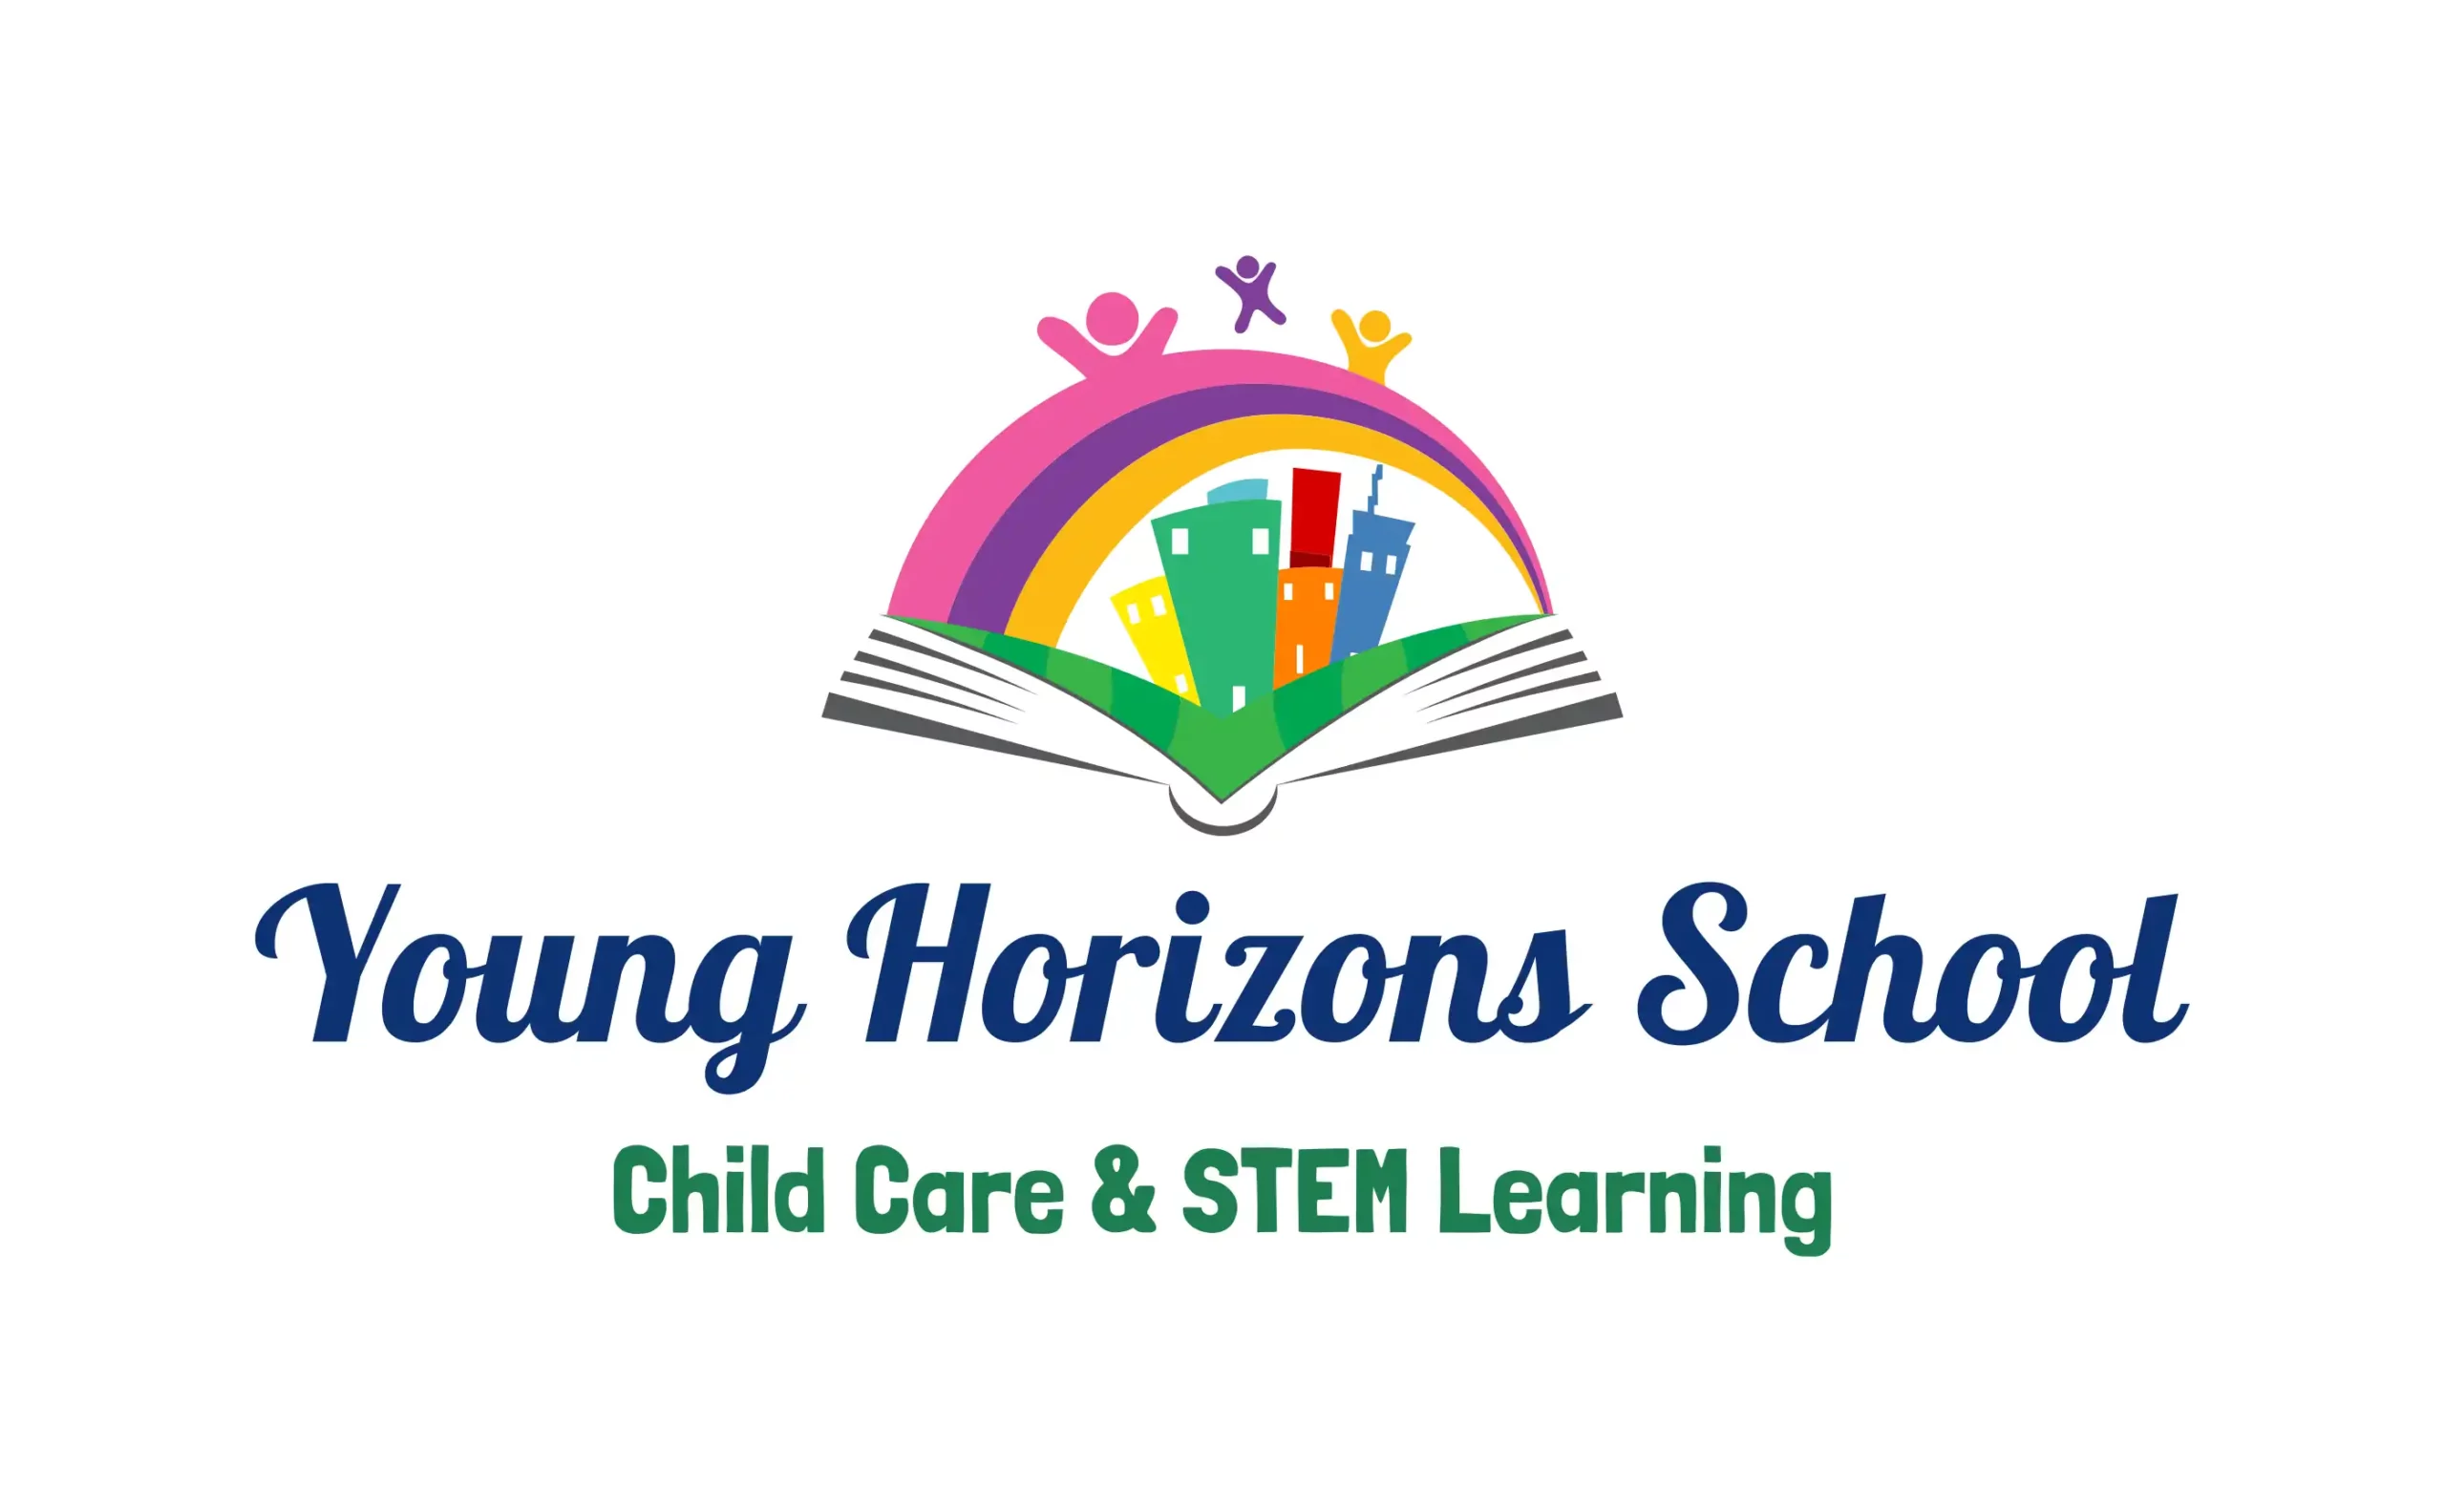 The Young Horizons School